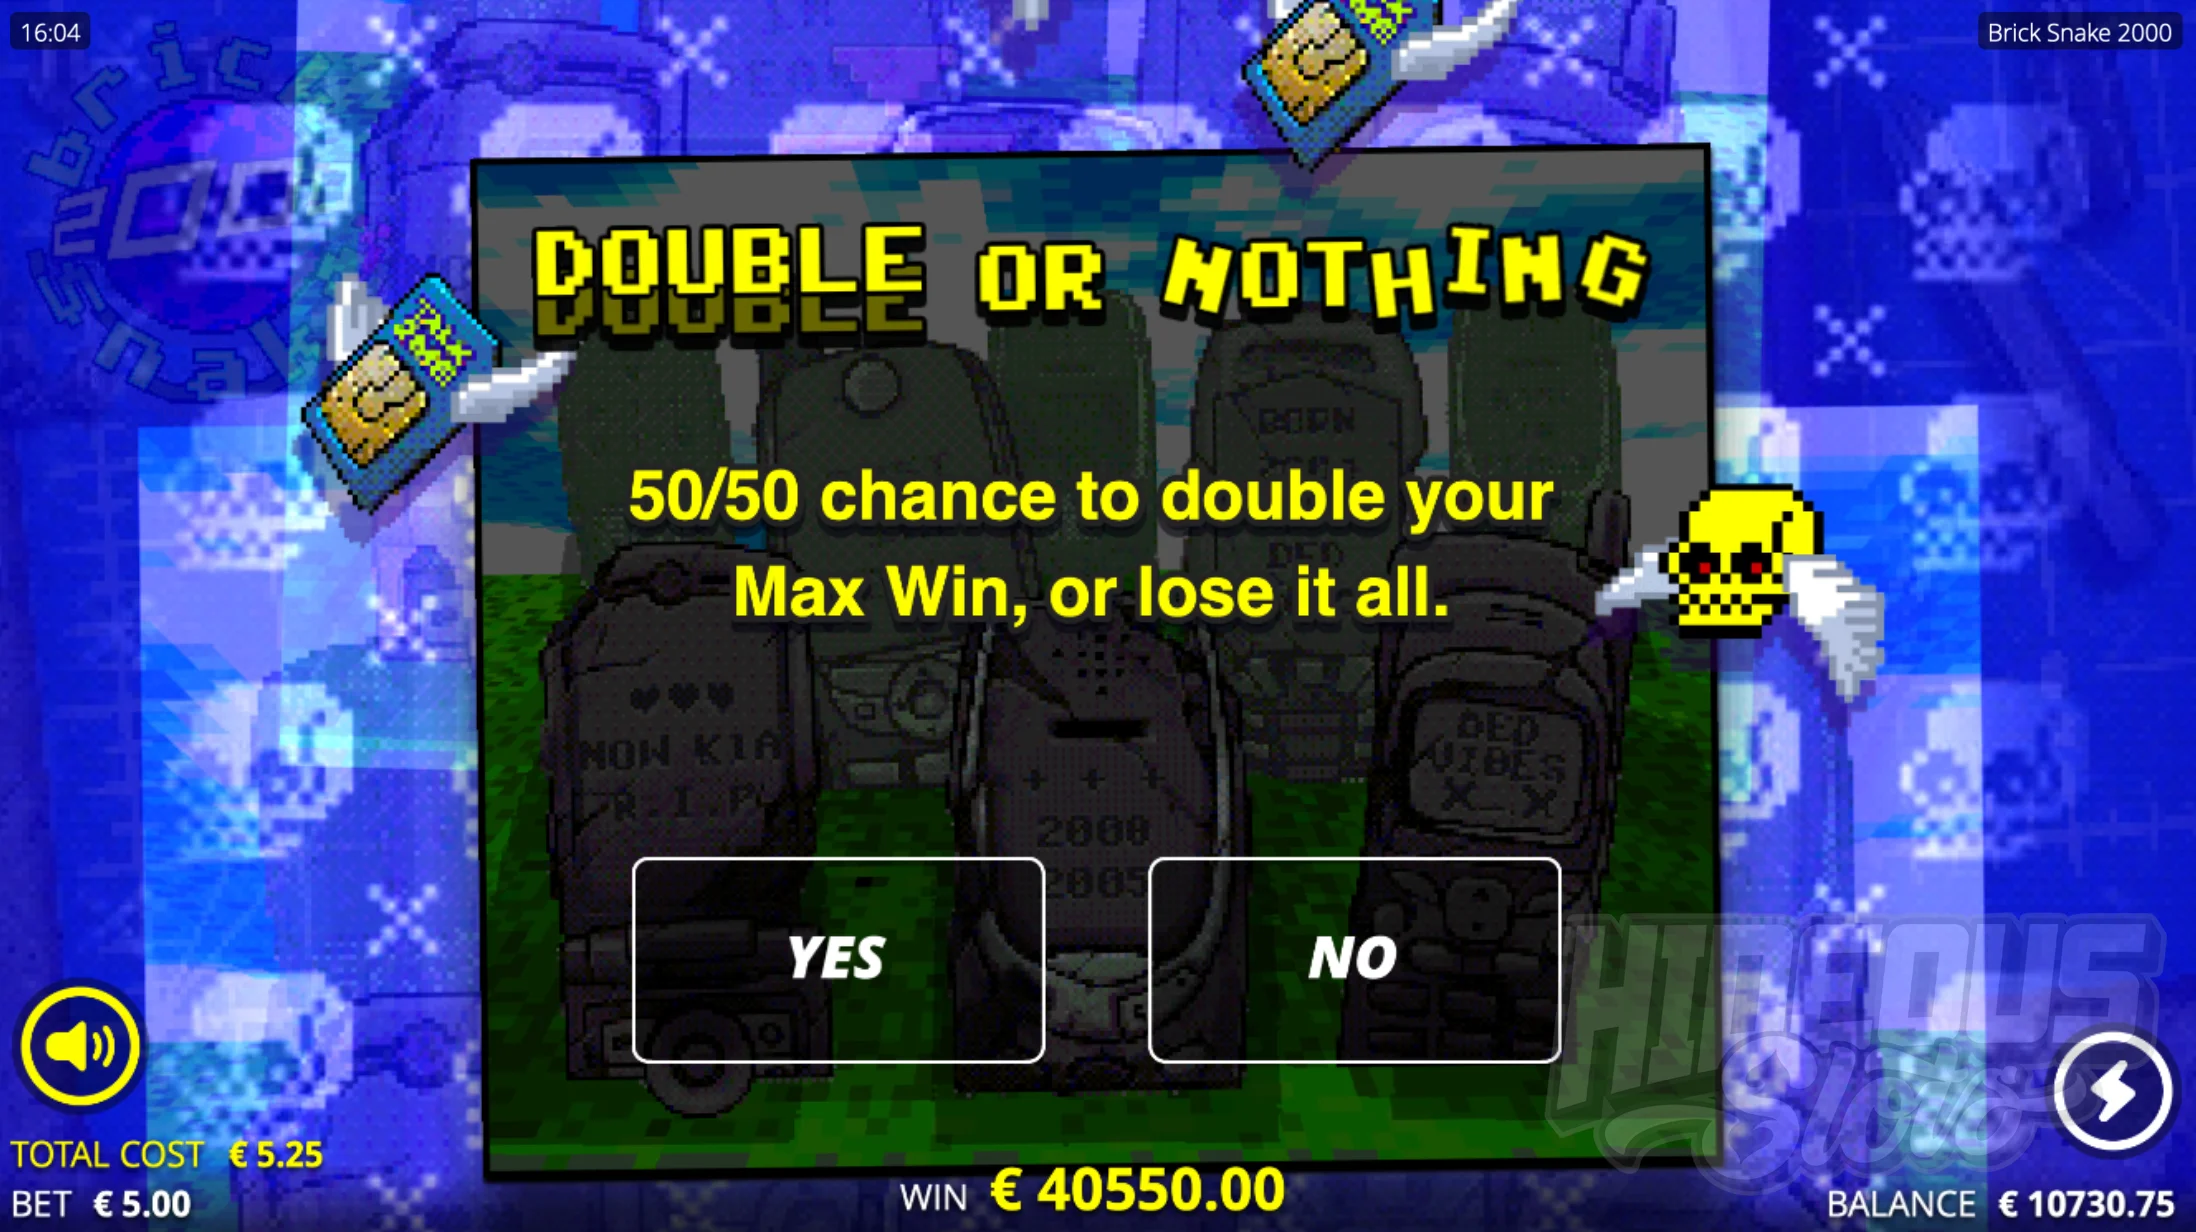 Double or Nothing Allows Players a Chance to Double Their Max Win or Lose It All